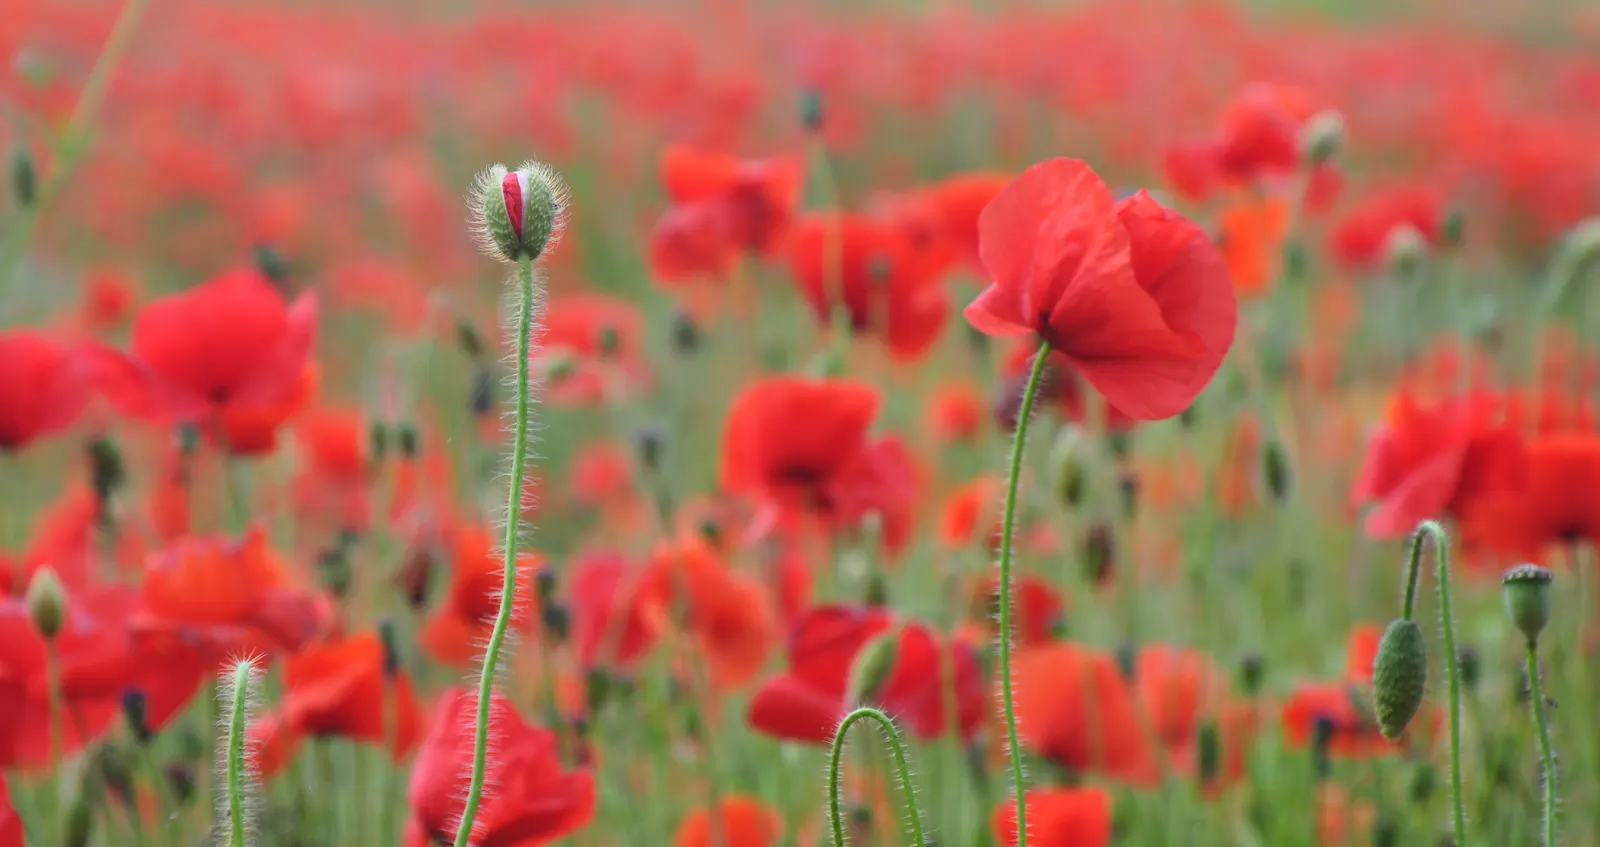 Why Poppy Art Lives On: The Essential Guide